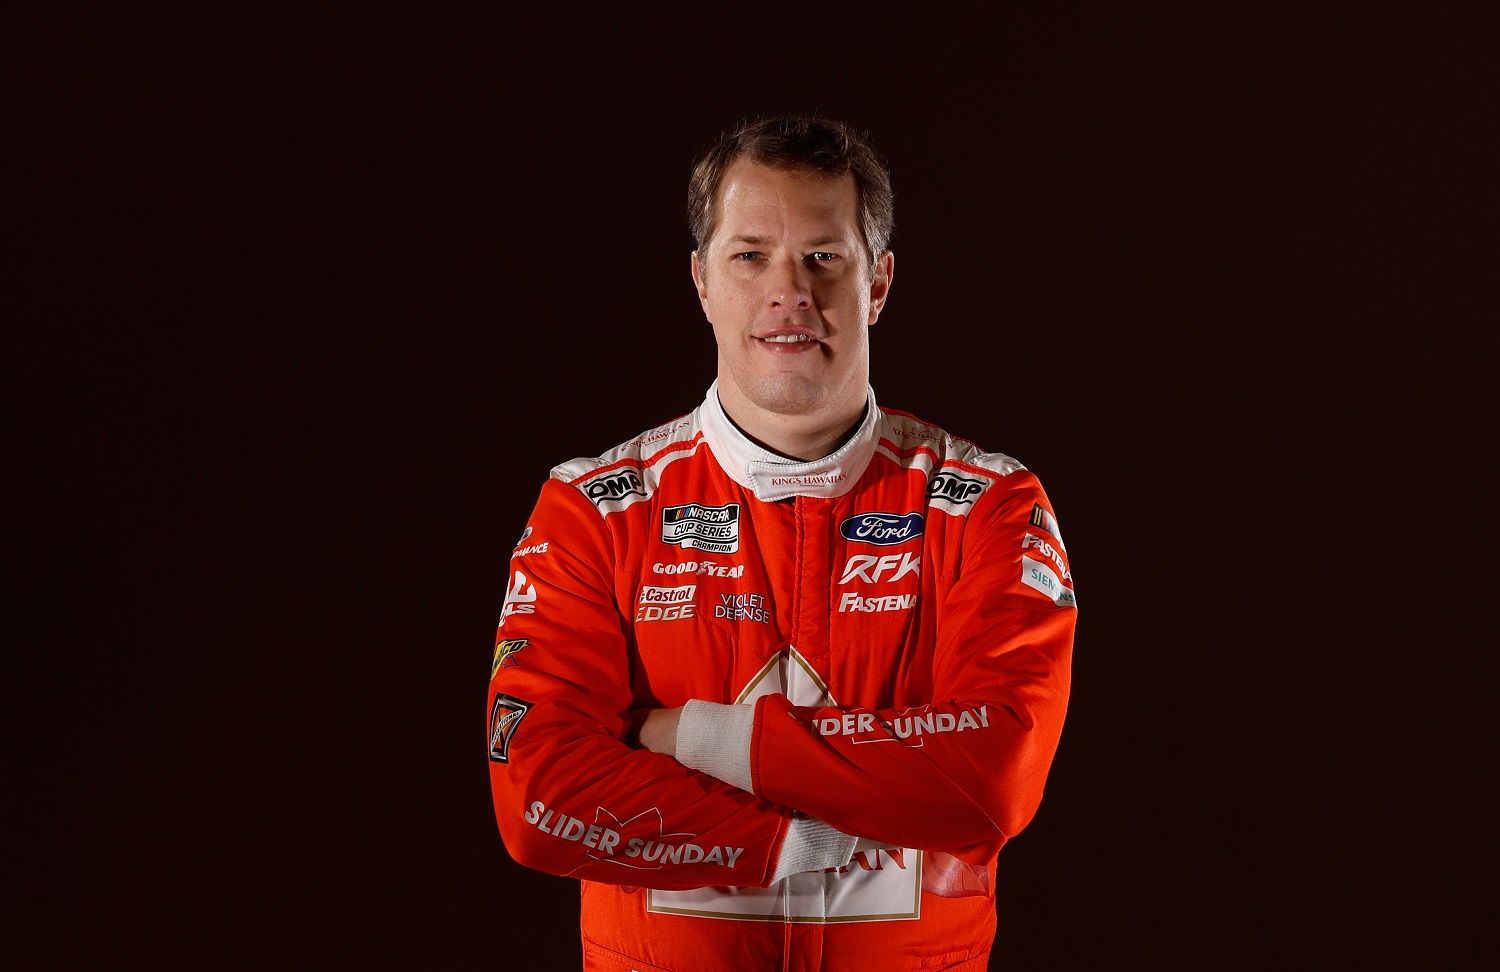 Driver Brad Keselowski poses for a photo during NASCAR Production Days at Charlotte Convention Center on Jan. 18, 2023. | Chris Graythen/Getty Images